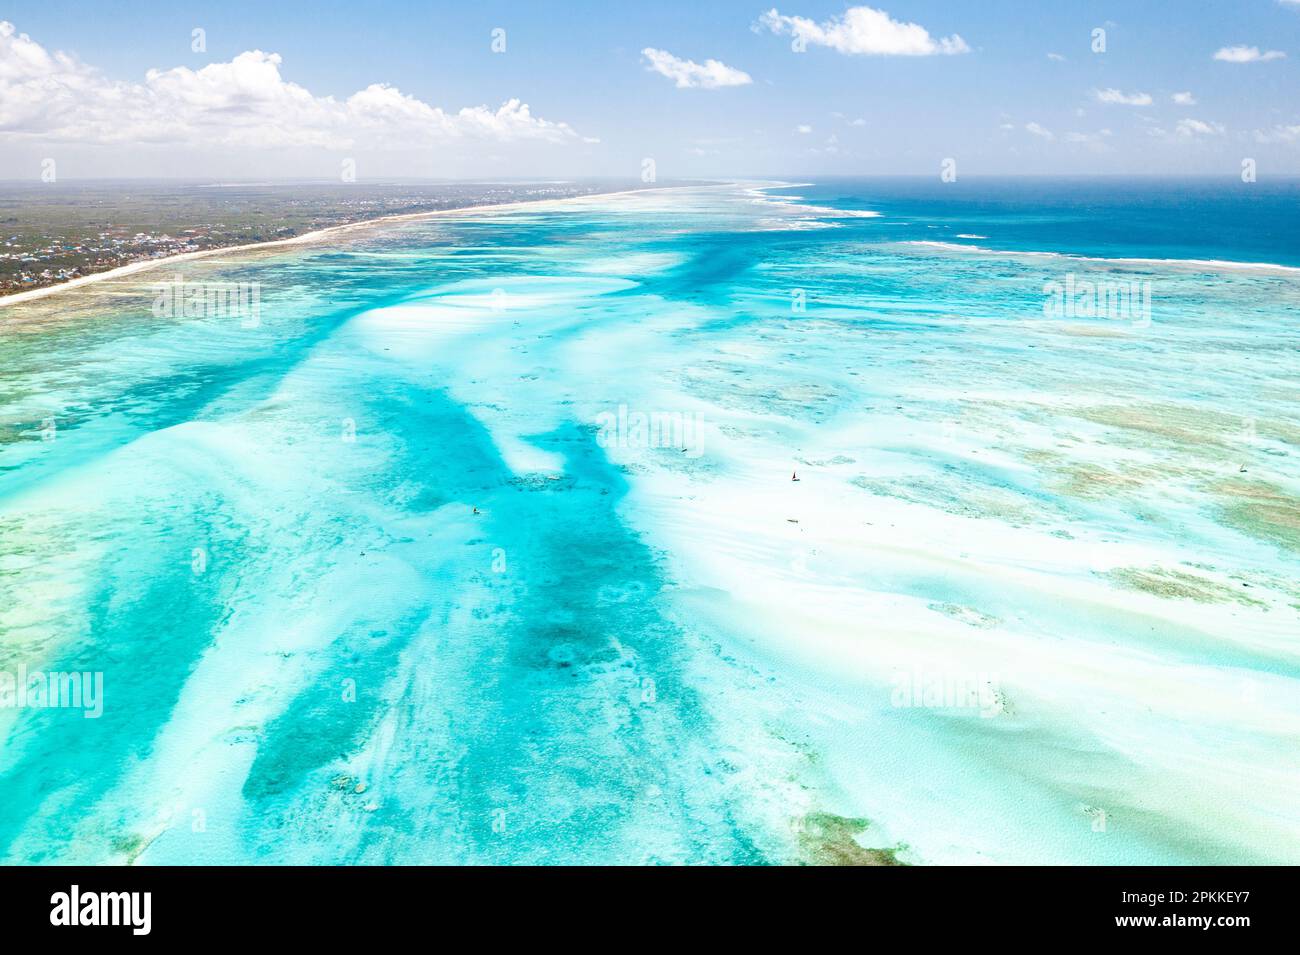 Aerial view of coral reef in the blue lagoon during low tide Paje, Jambiani, Zanzibar, Tanzania, East Africa, Africa Stock Photo